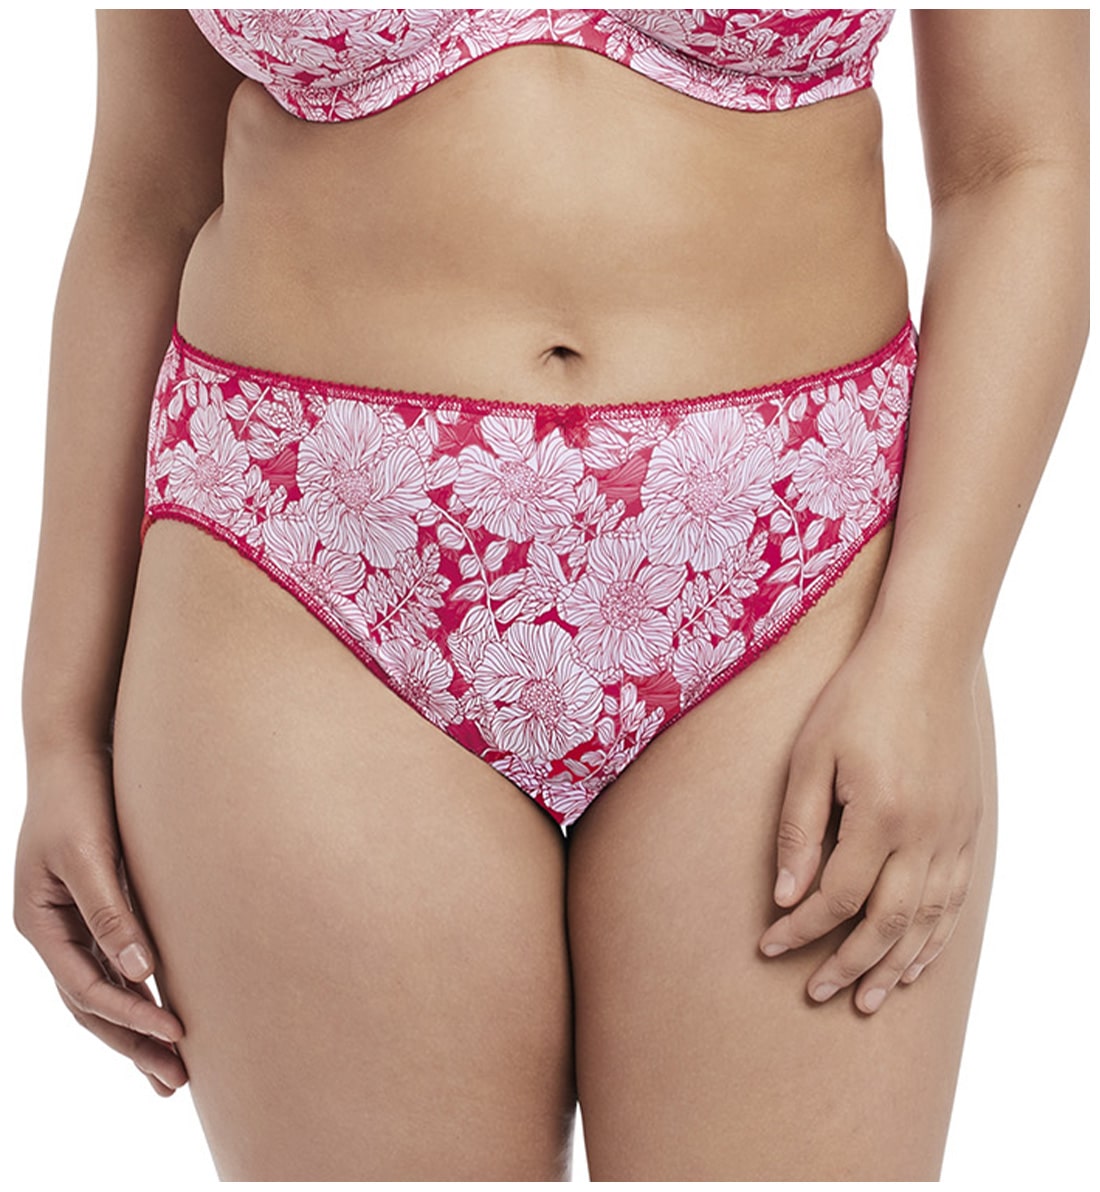 Elomi Kim Matching Panty Brief (4345),Large,Fiery Floral - Fiery Floral,Large